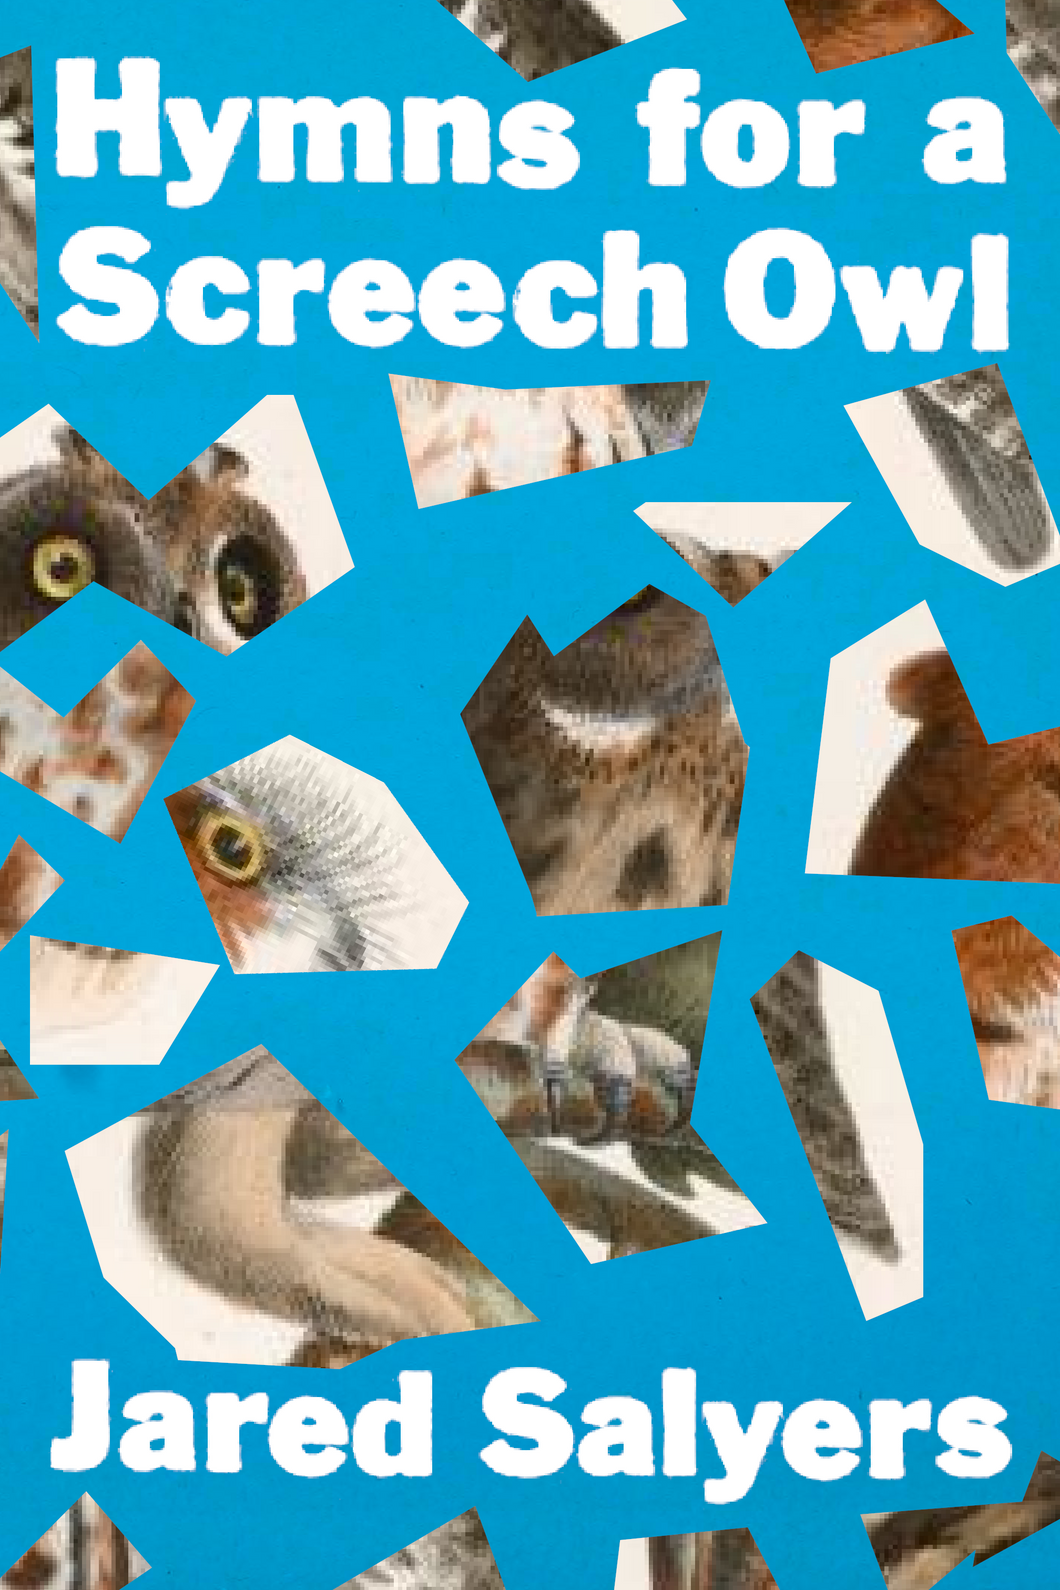 Hymns for a Screech Owl, by Jared Salyers-Print Books-Bottlecap Press